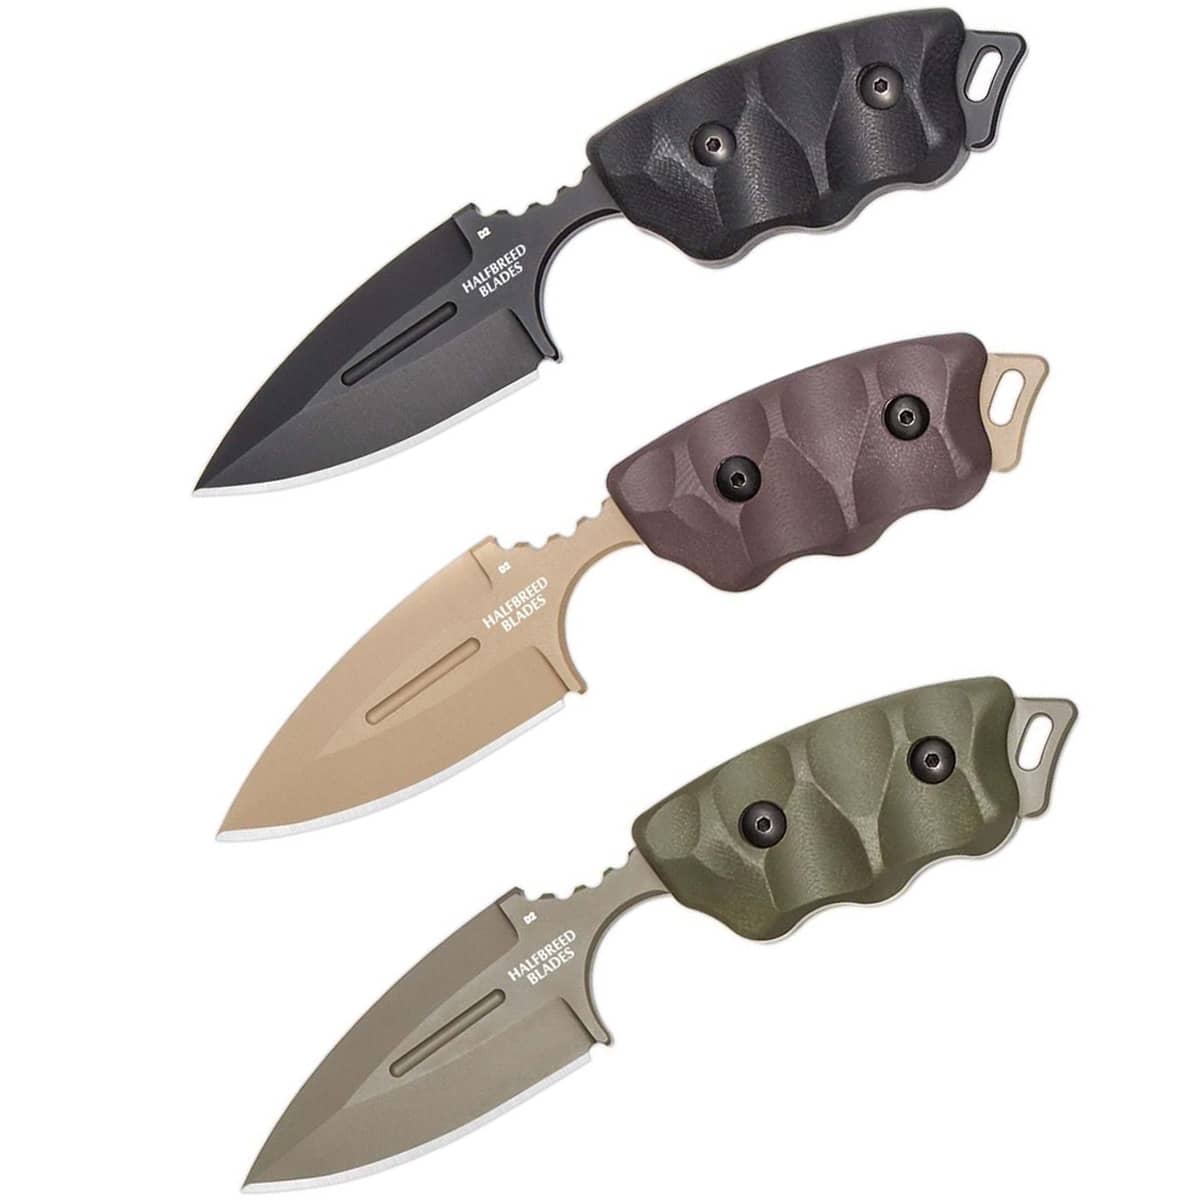 HalfBreed Compact Clearance Knife CCK-05